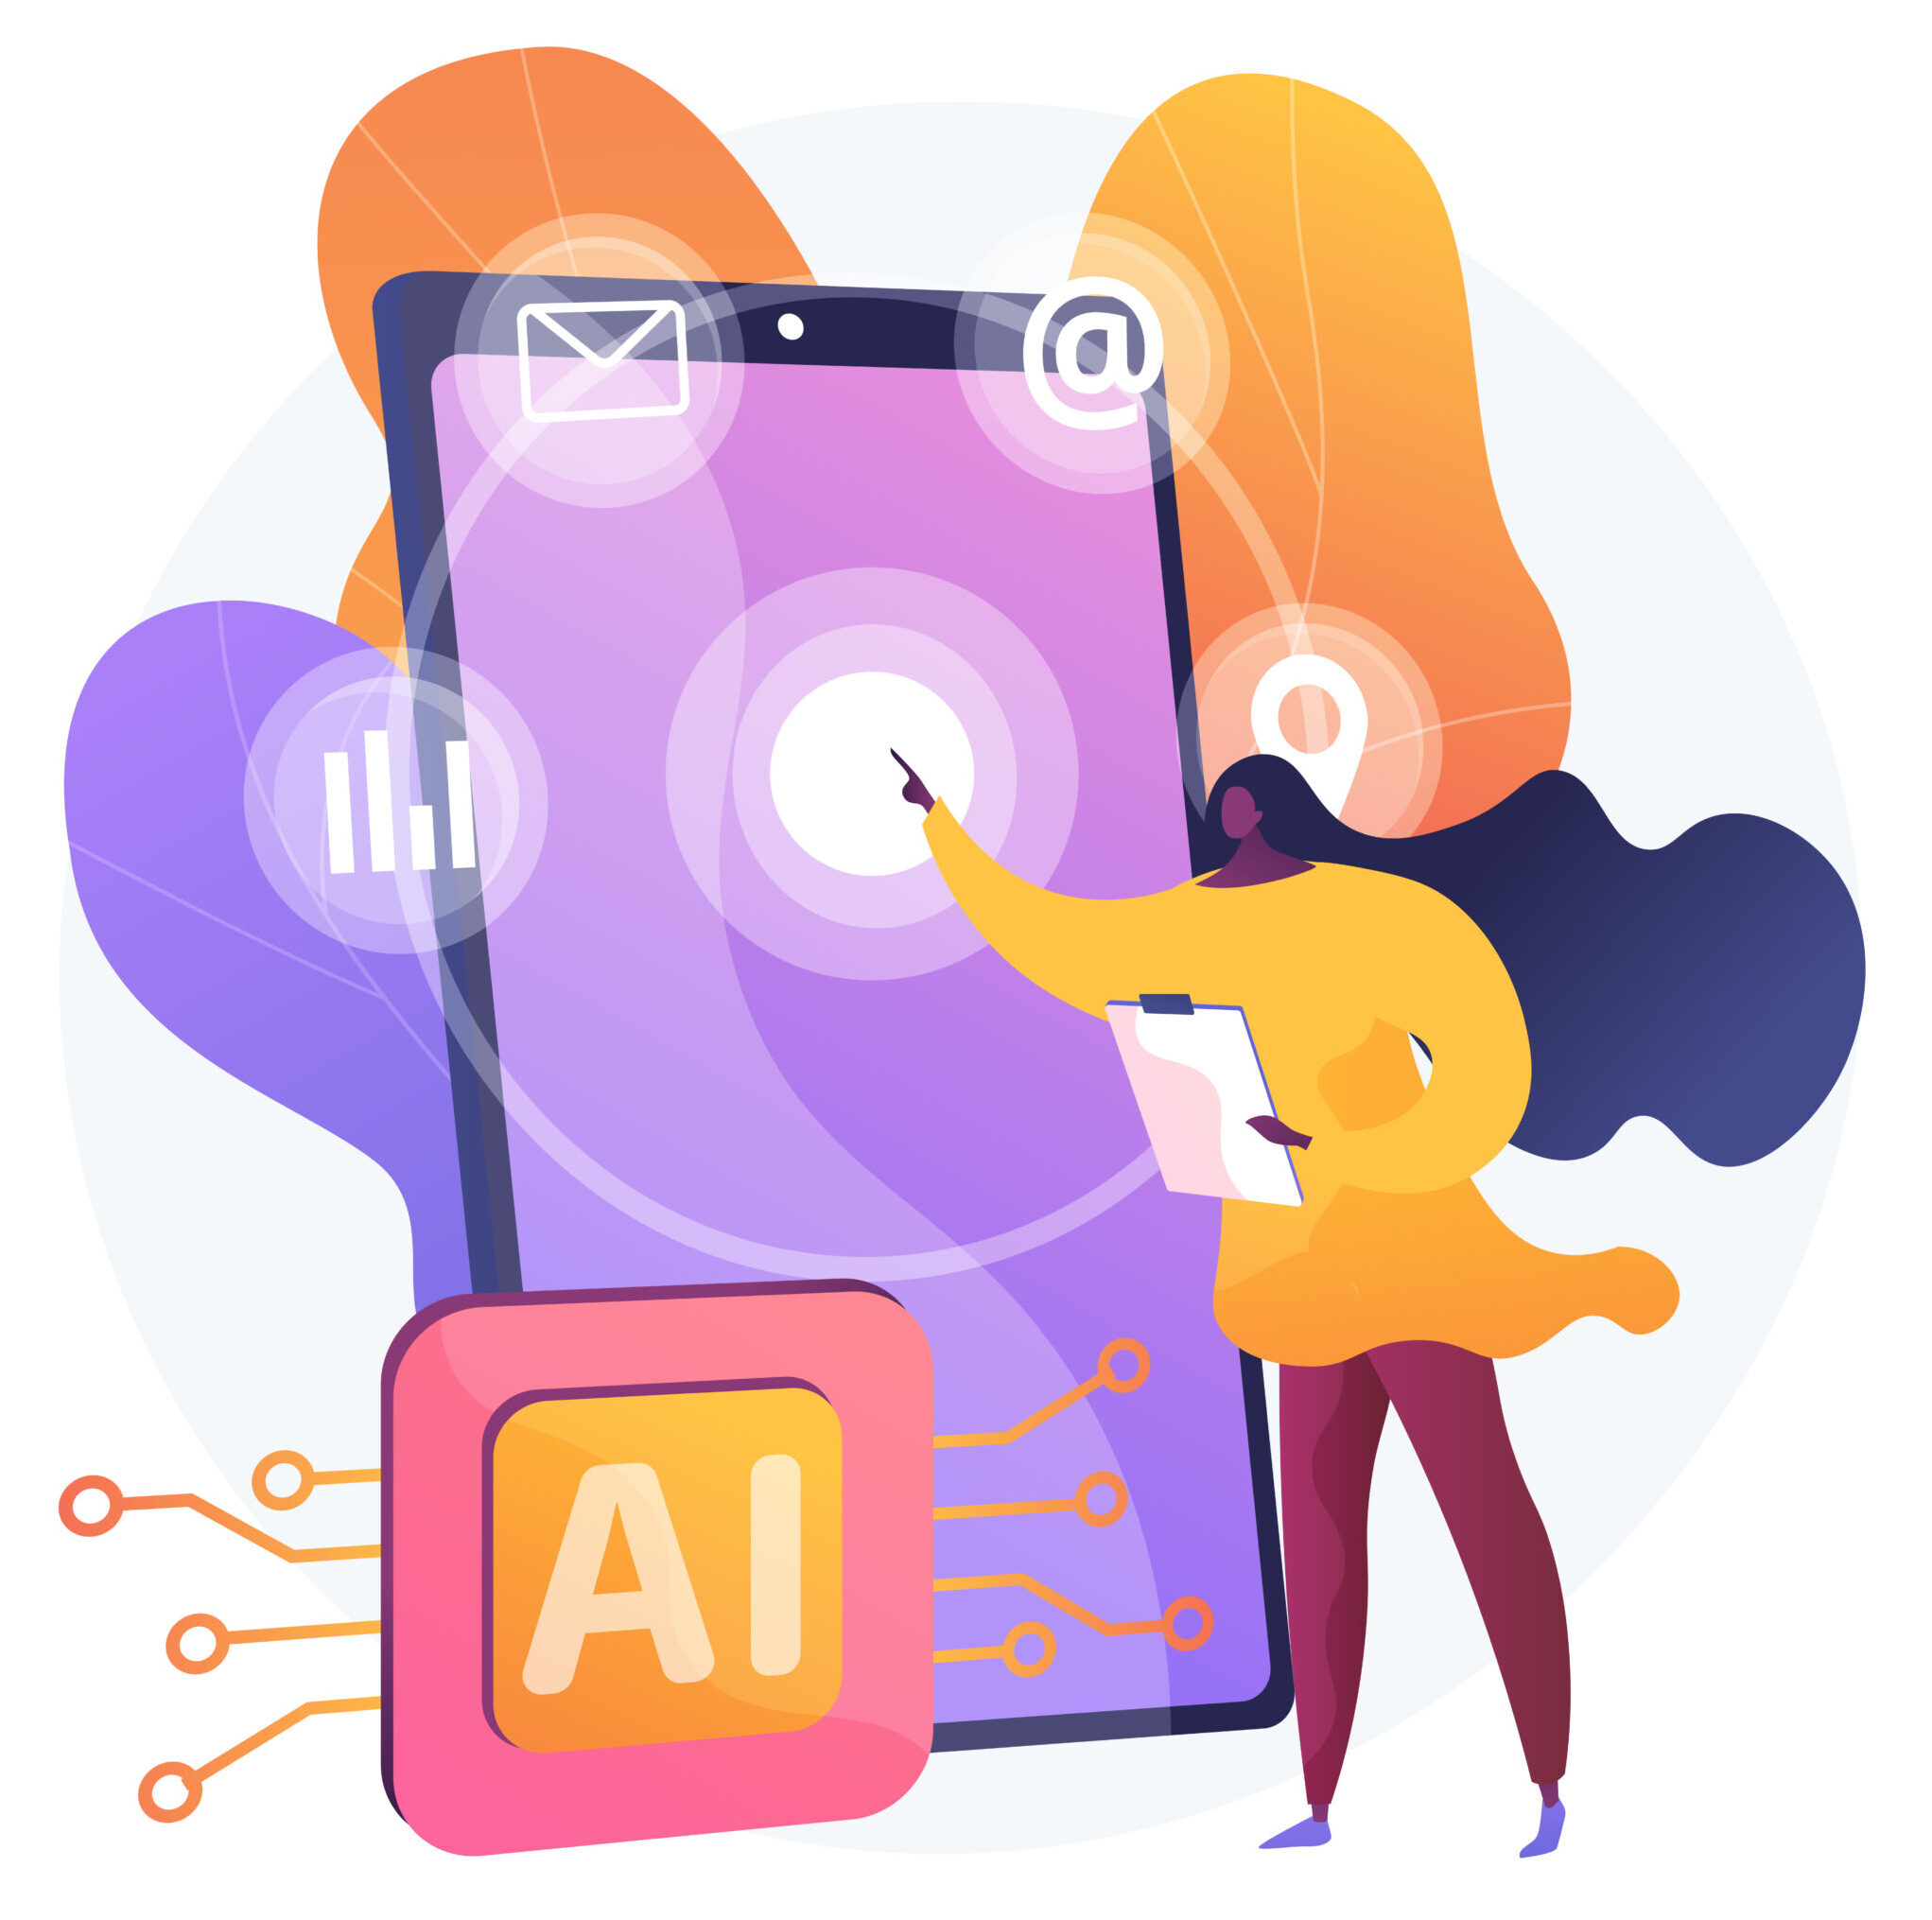 Intelligent interface abstract concept vector illustration. Interactive user interface, usability engineering, personalized experience design, artificial intelligence, abstract metaphor.